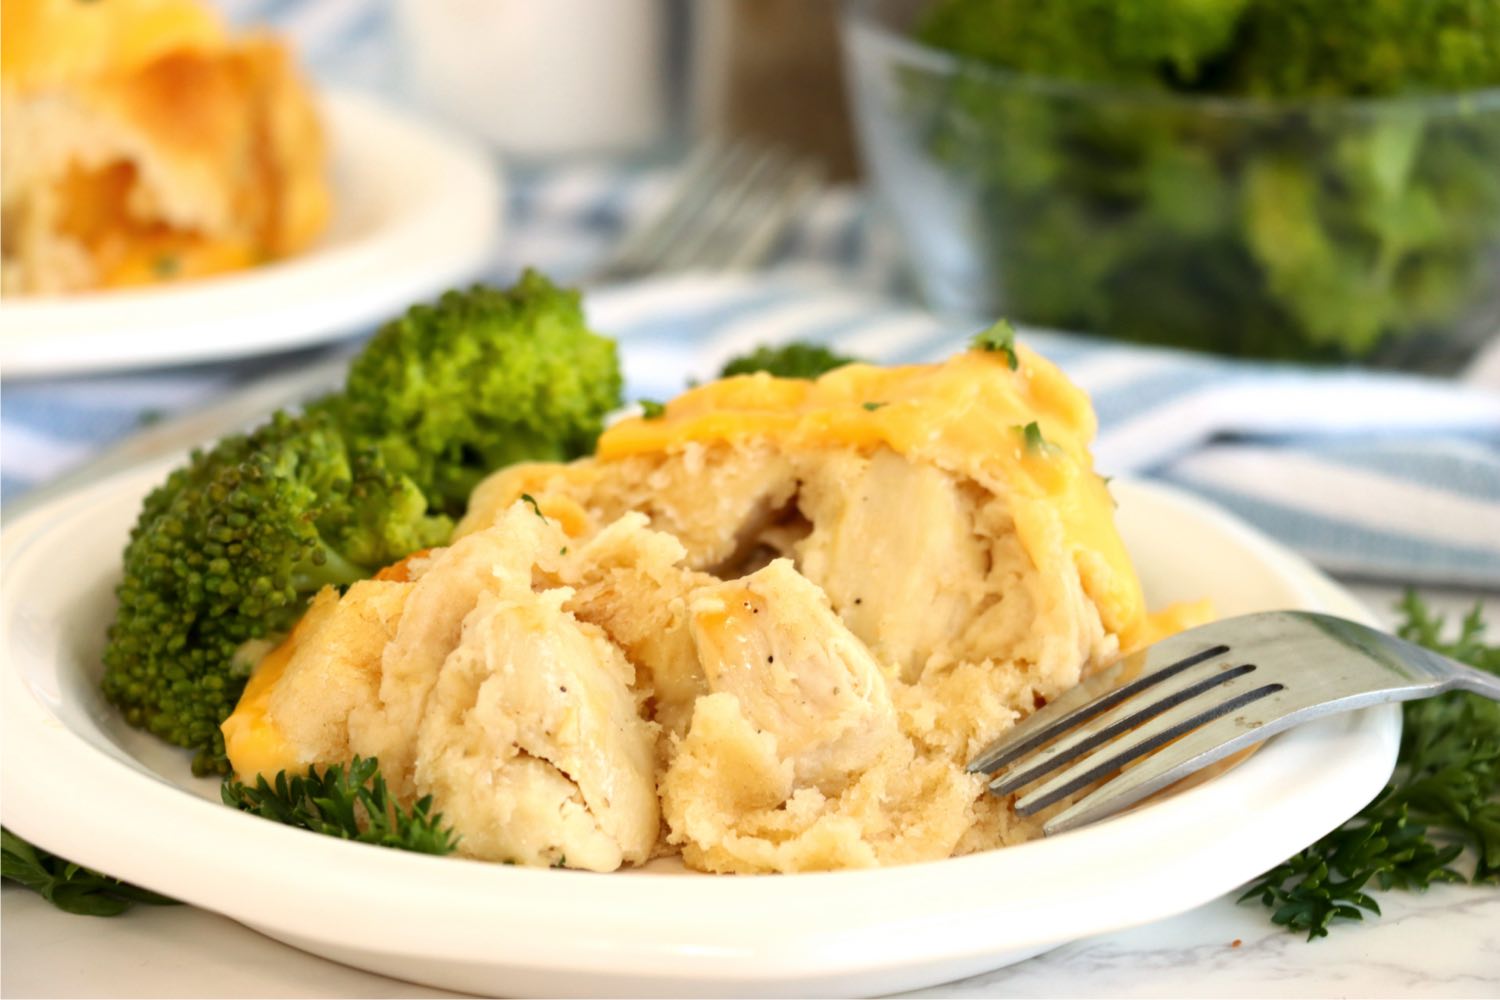 crescent roll casserole and broccoli on a plate